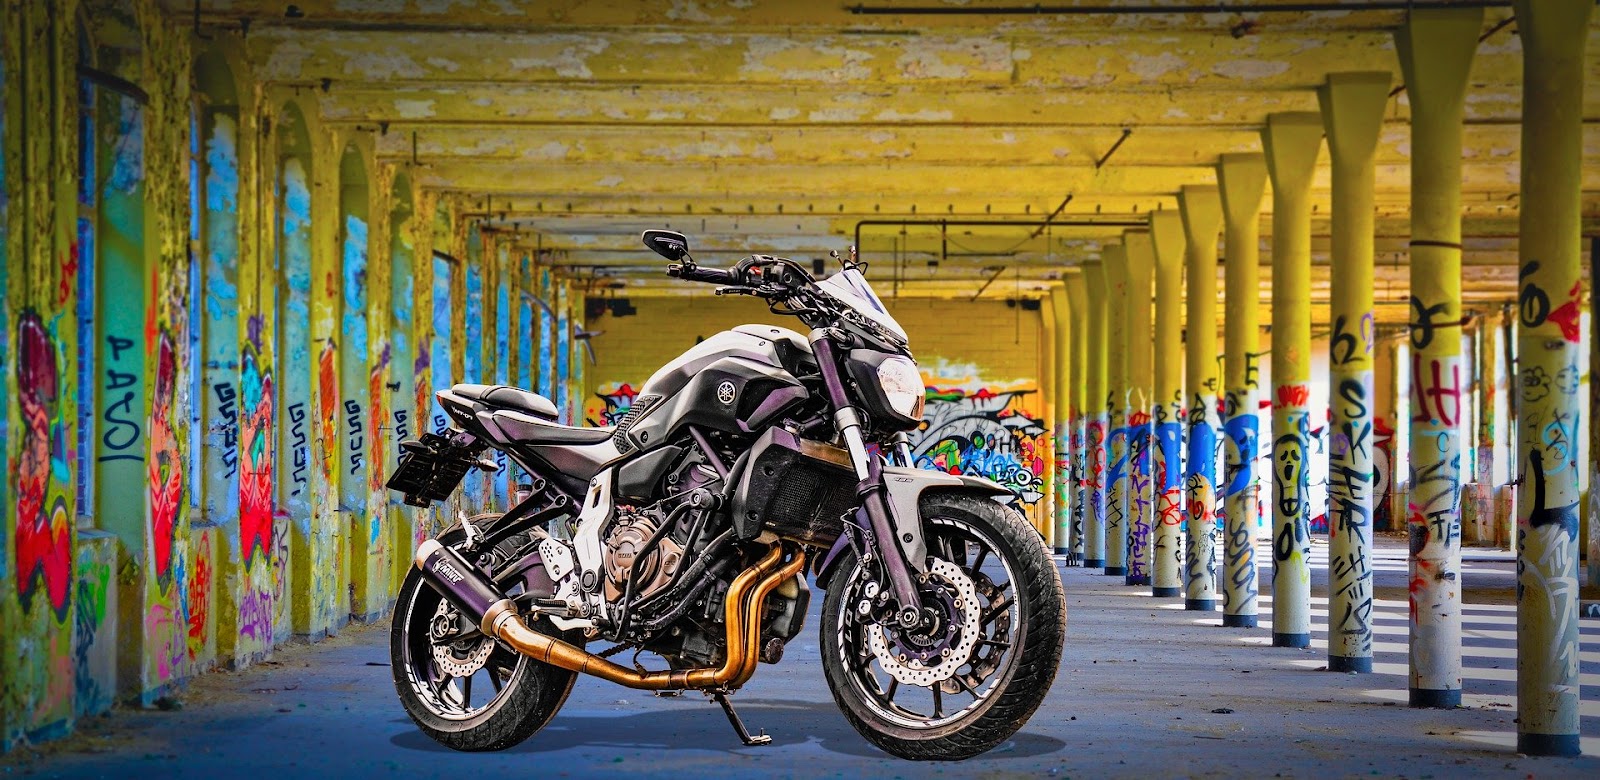 The Most Popular Types of Motorcycles